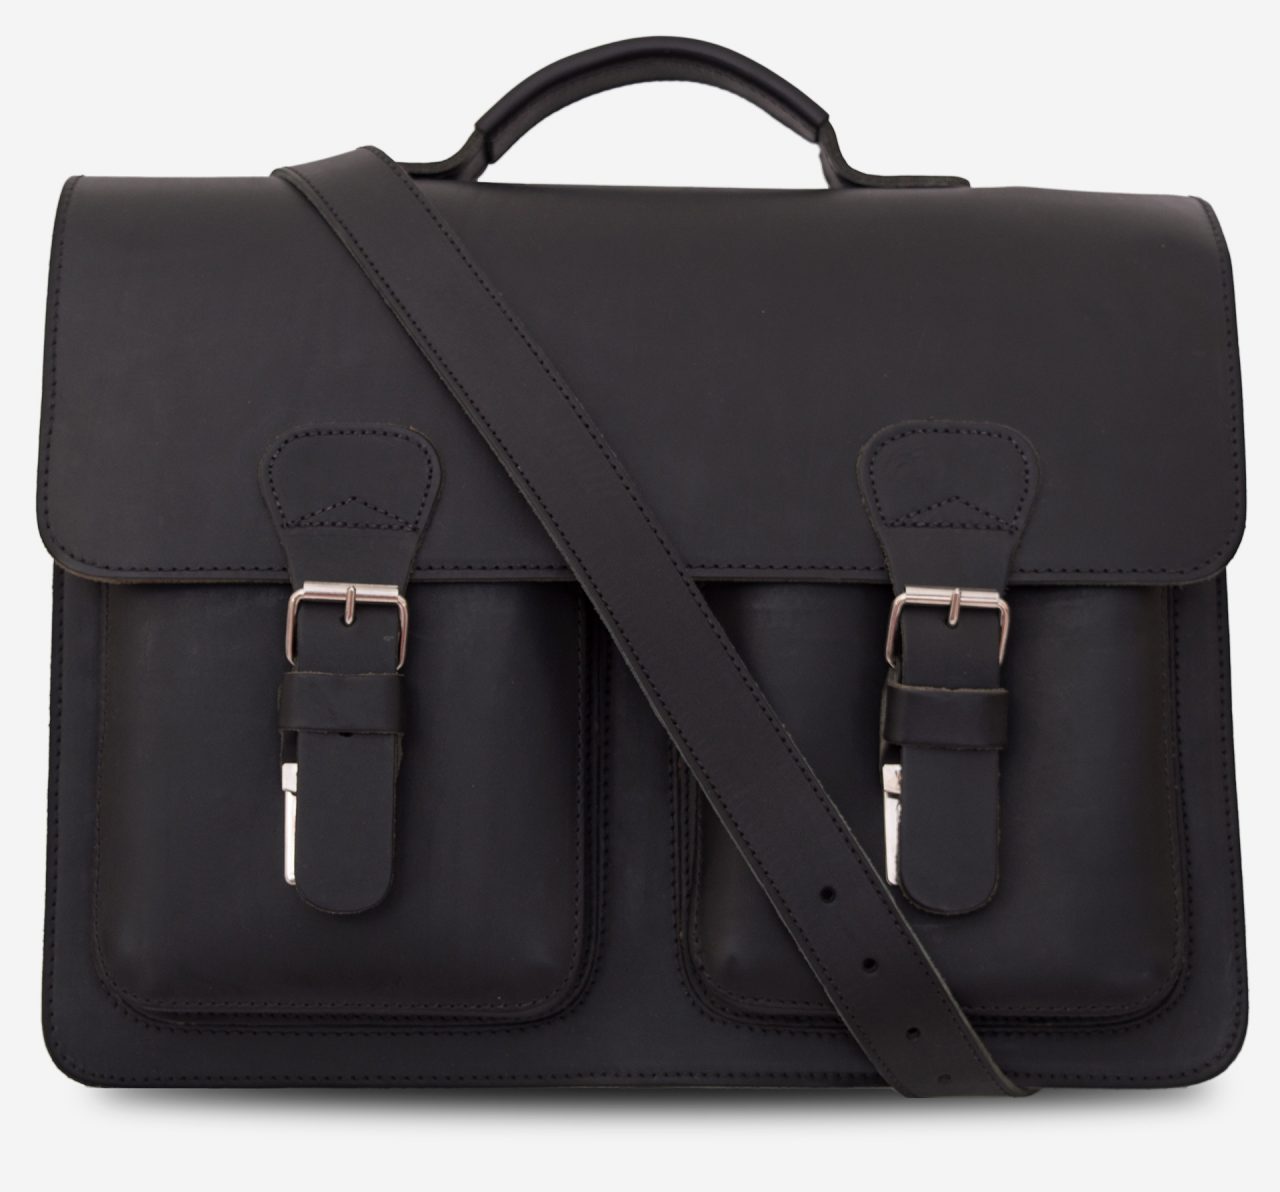 Front view of black leather satchel briefcase with front pockets and shoulder strap 112131.